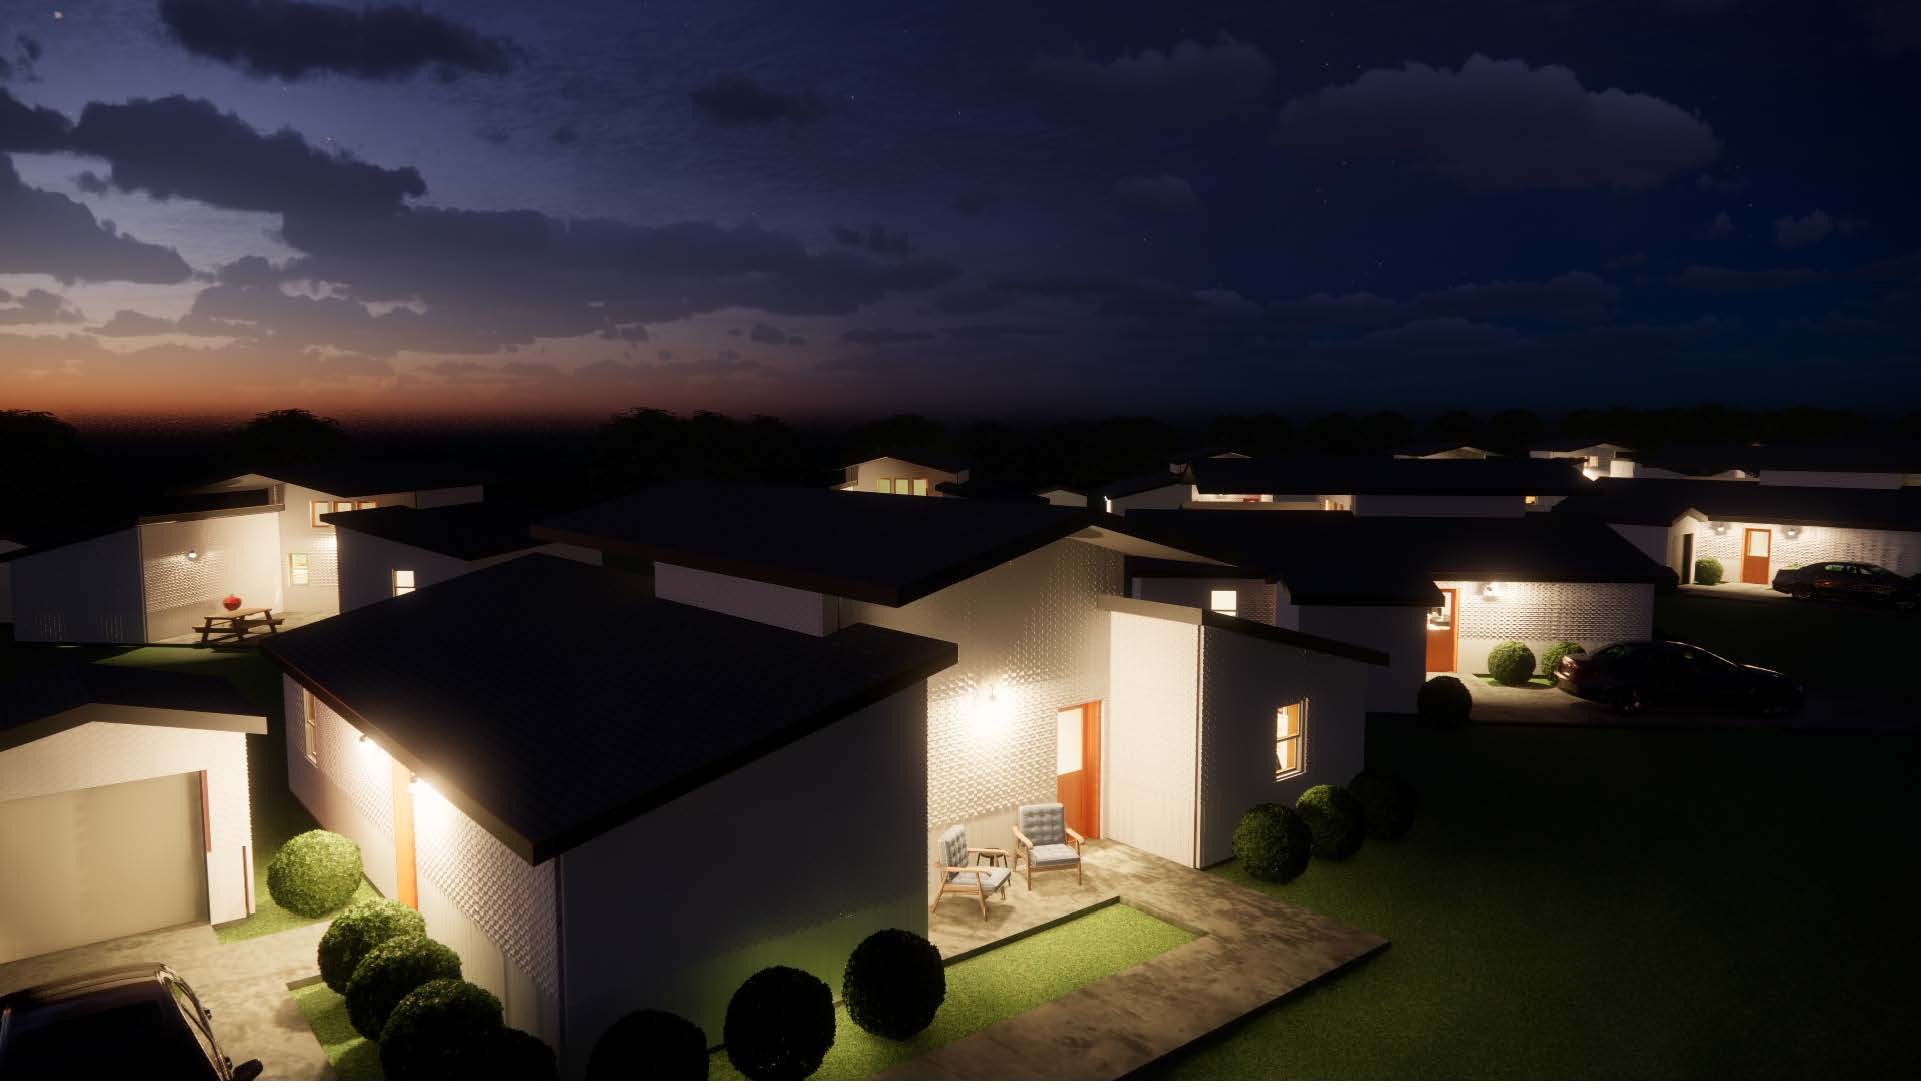 exterior rendering of house at night